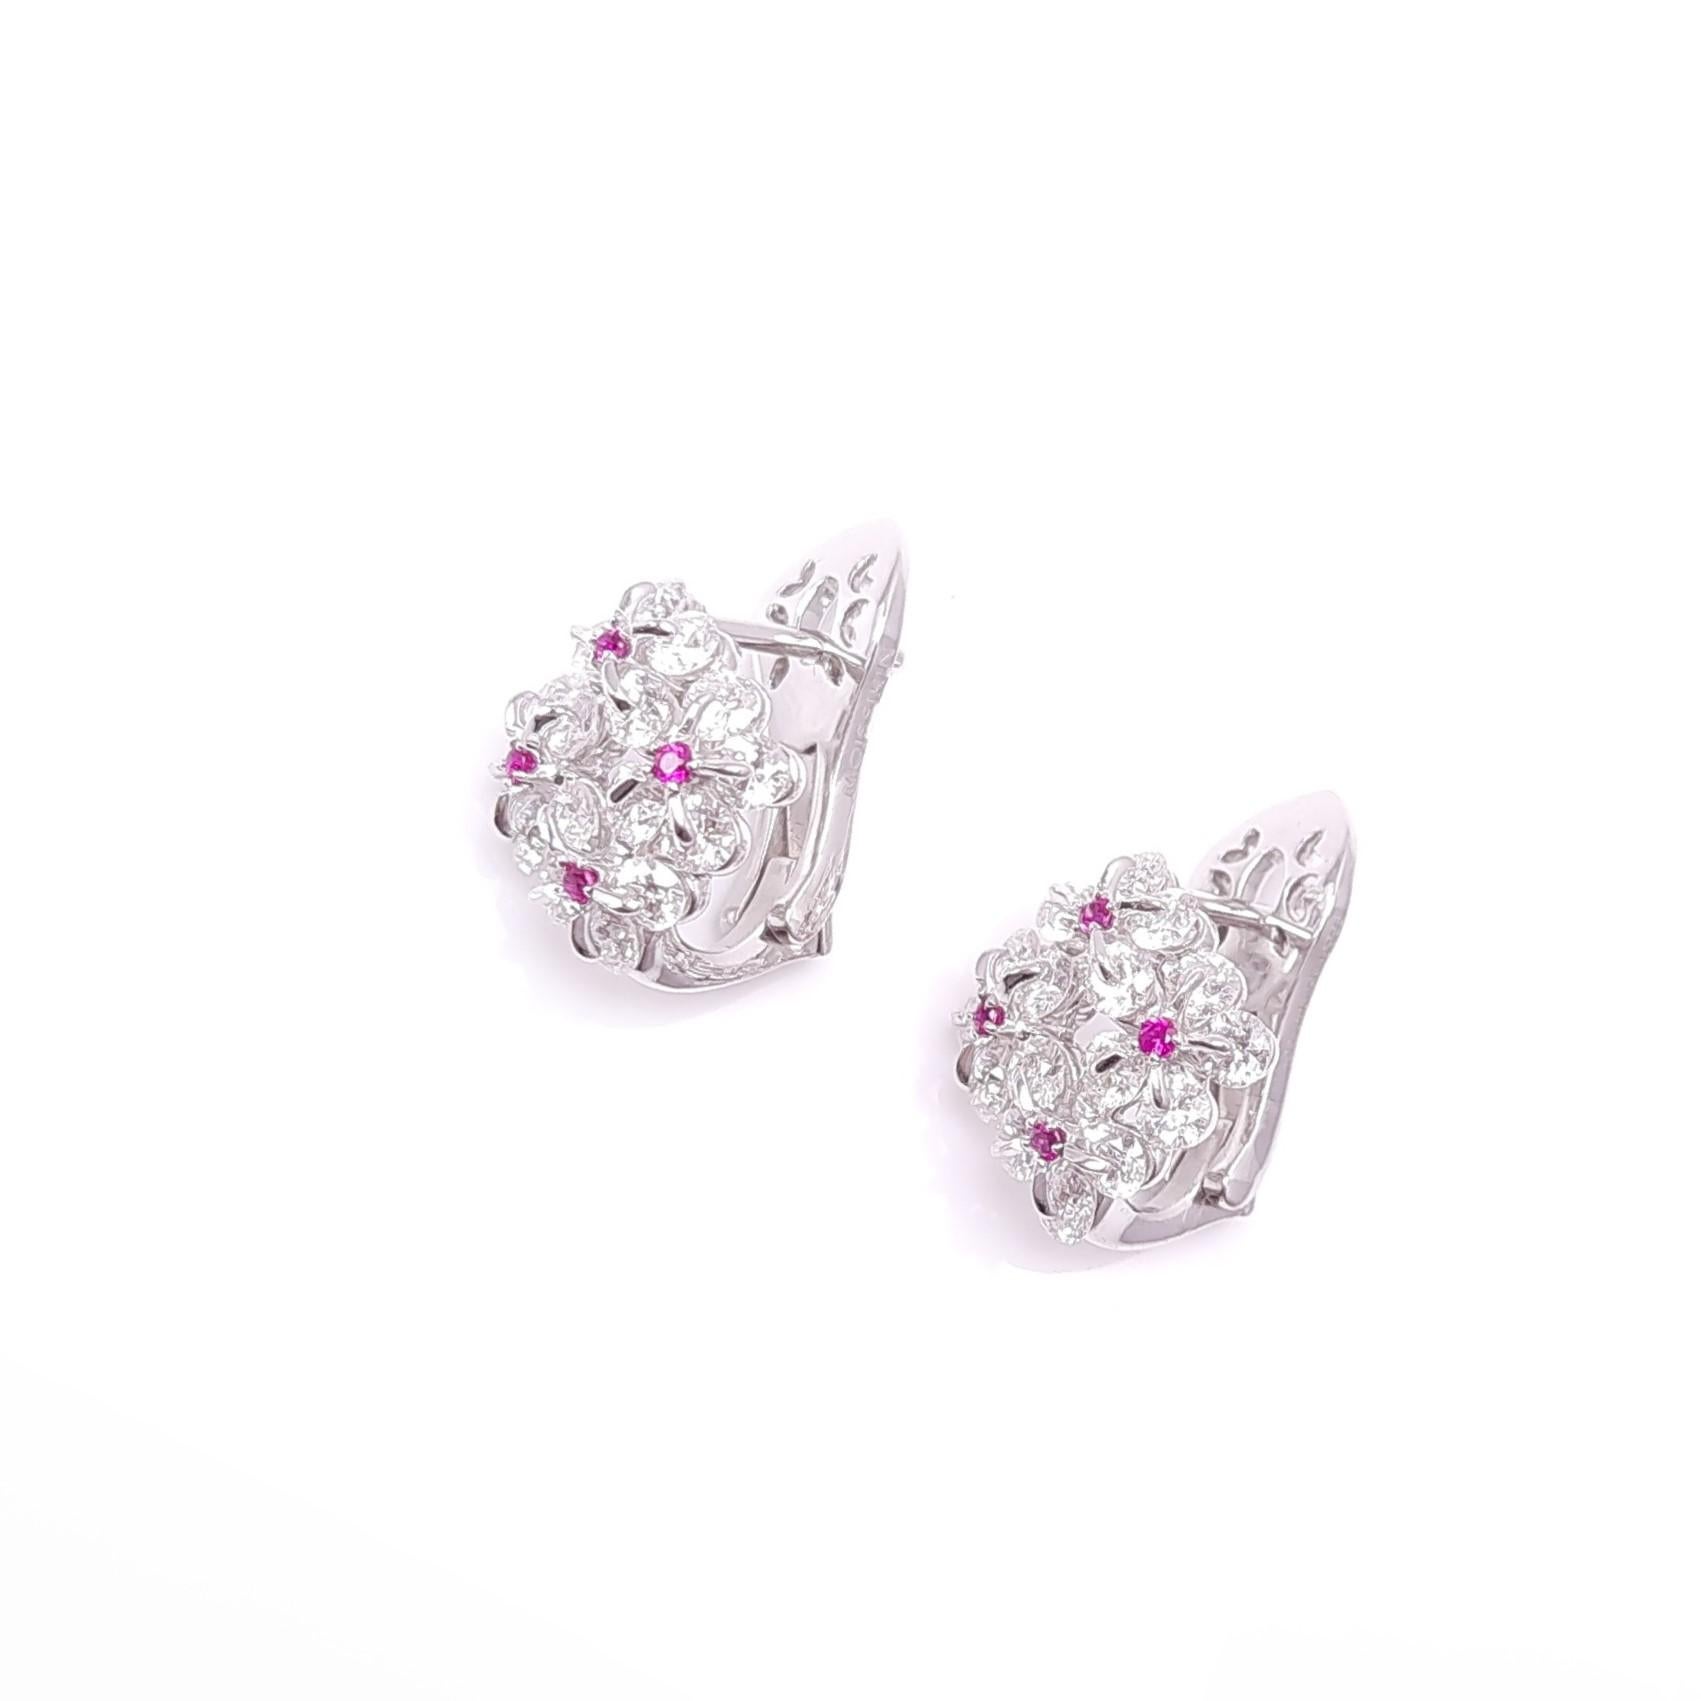 The innovative Russian setting Waltzing Brilliance breaths life into a jewel, making the earring more airy and sparkling!
Diamonds are mounted in a delicate flower design. Thanks to the innovation, the stones tremble and rotate as you move as if